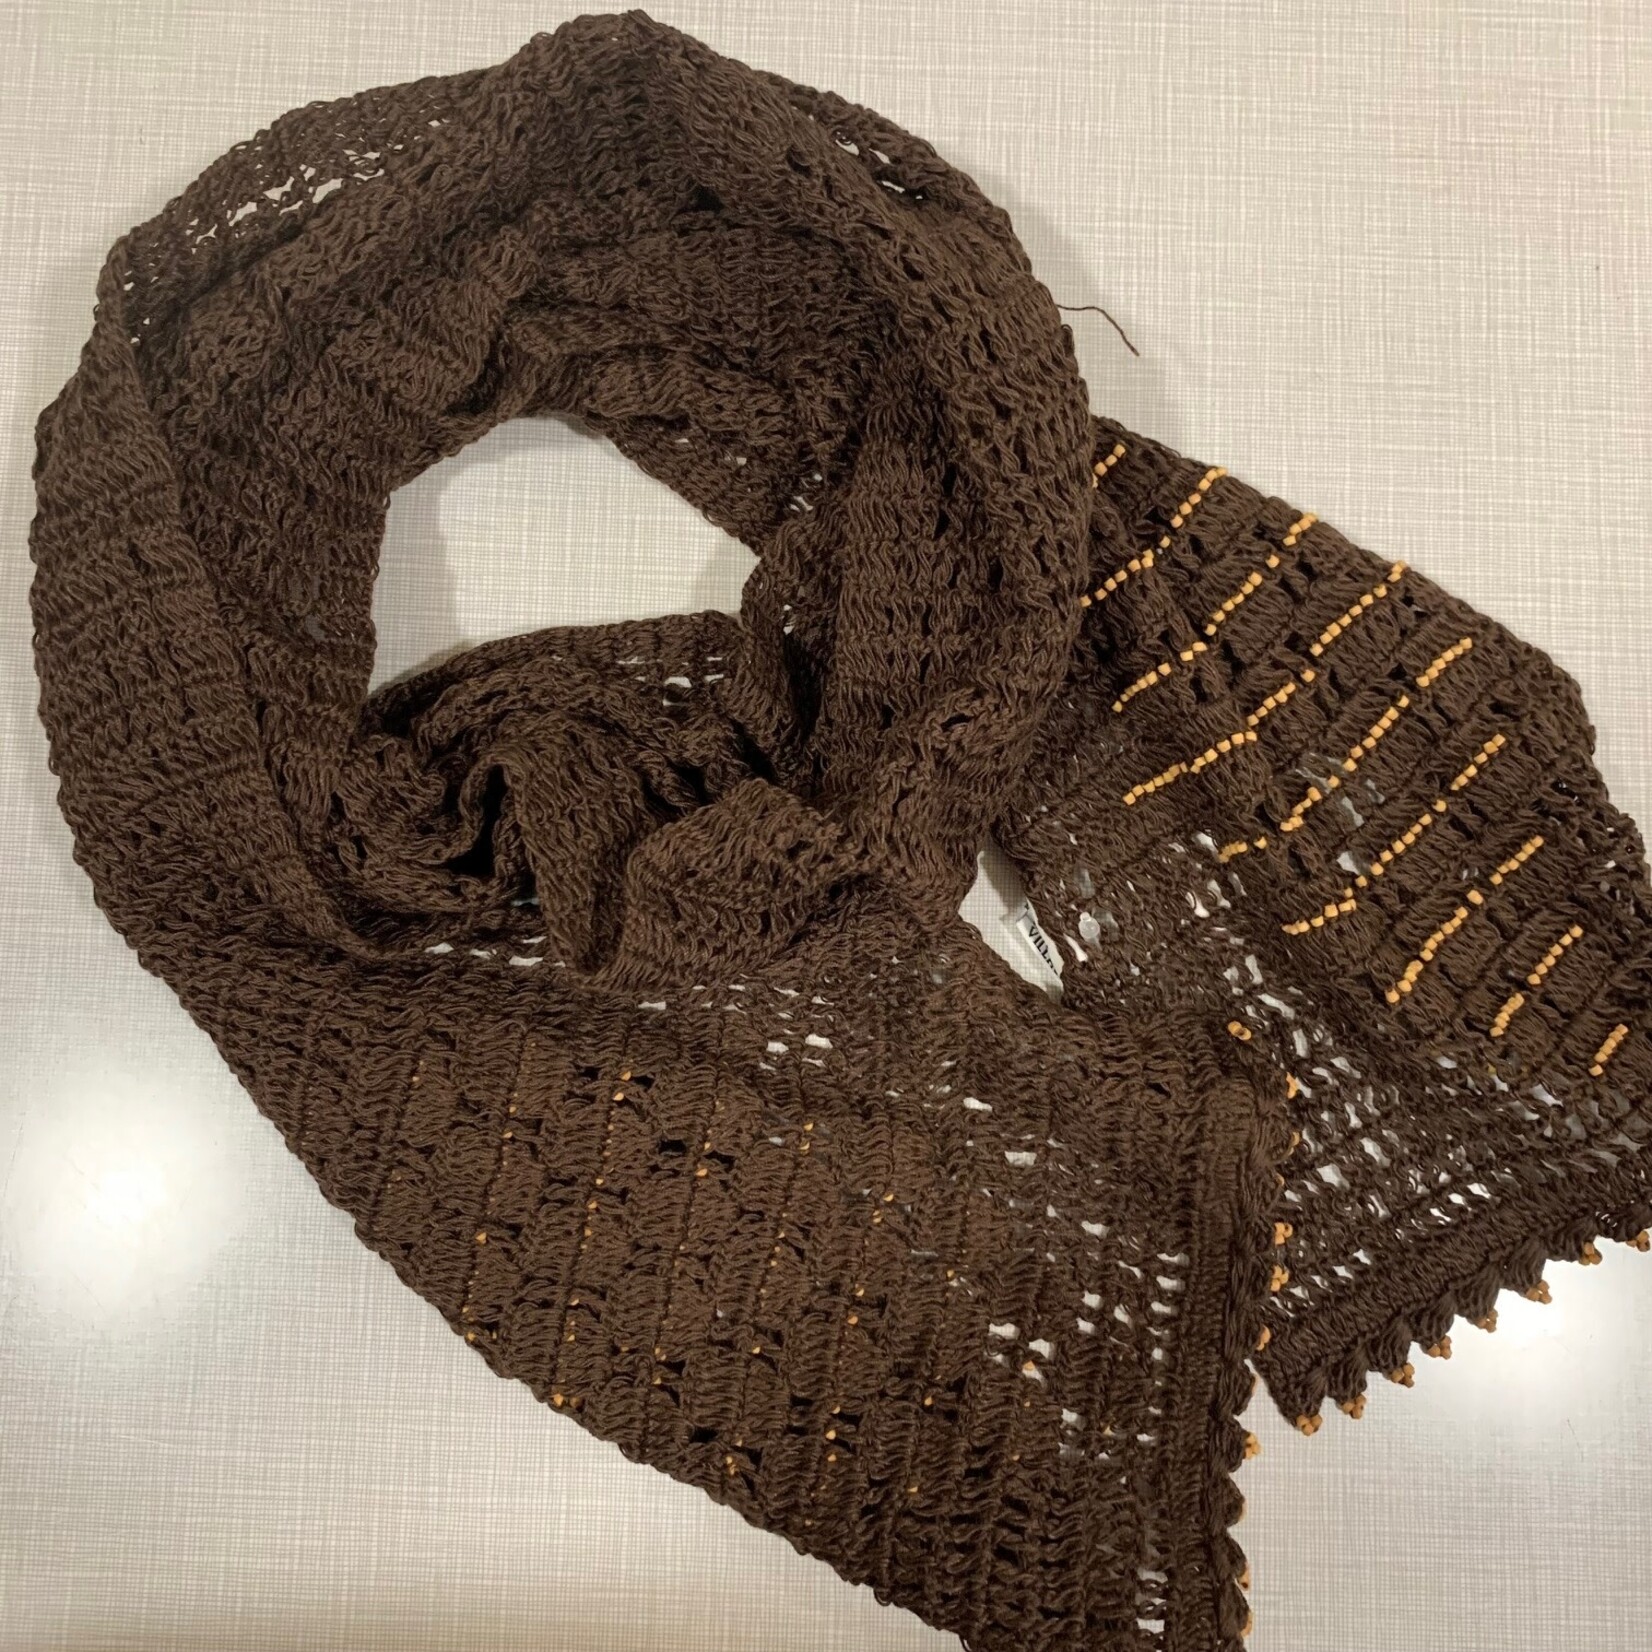 Ten Thousand Villages Brown Scarf with Beads,  Bangladesh